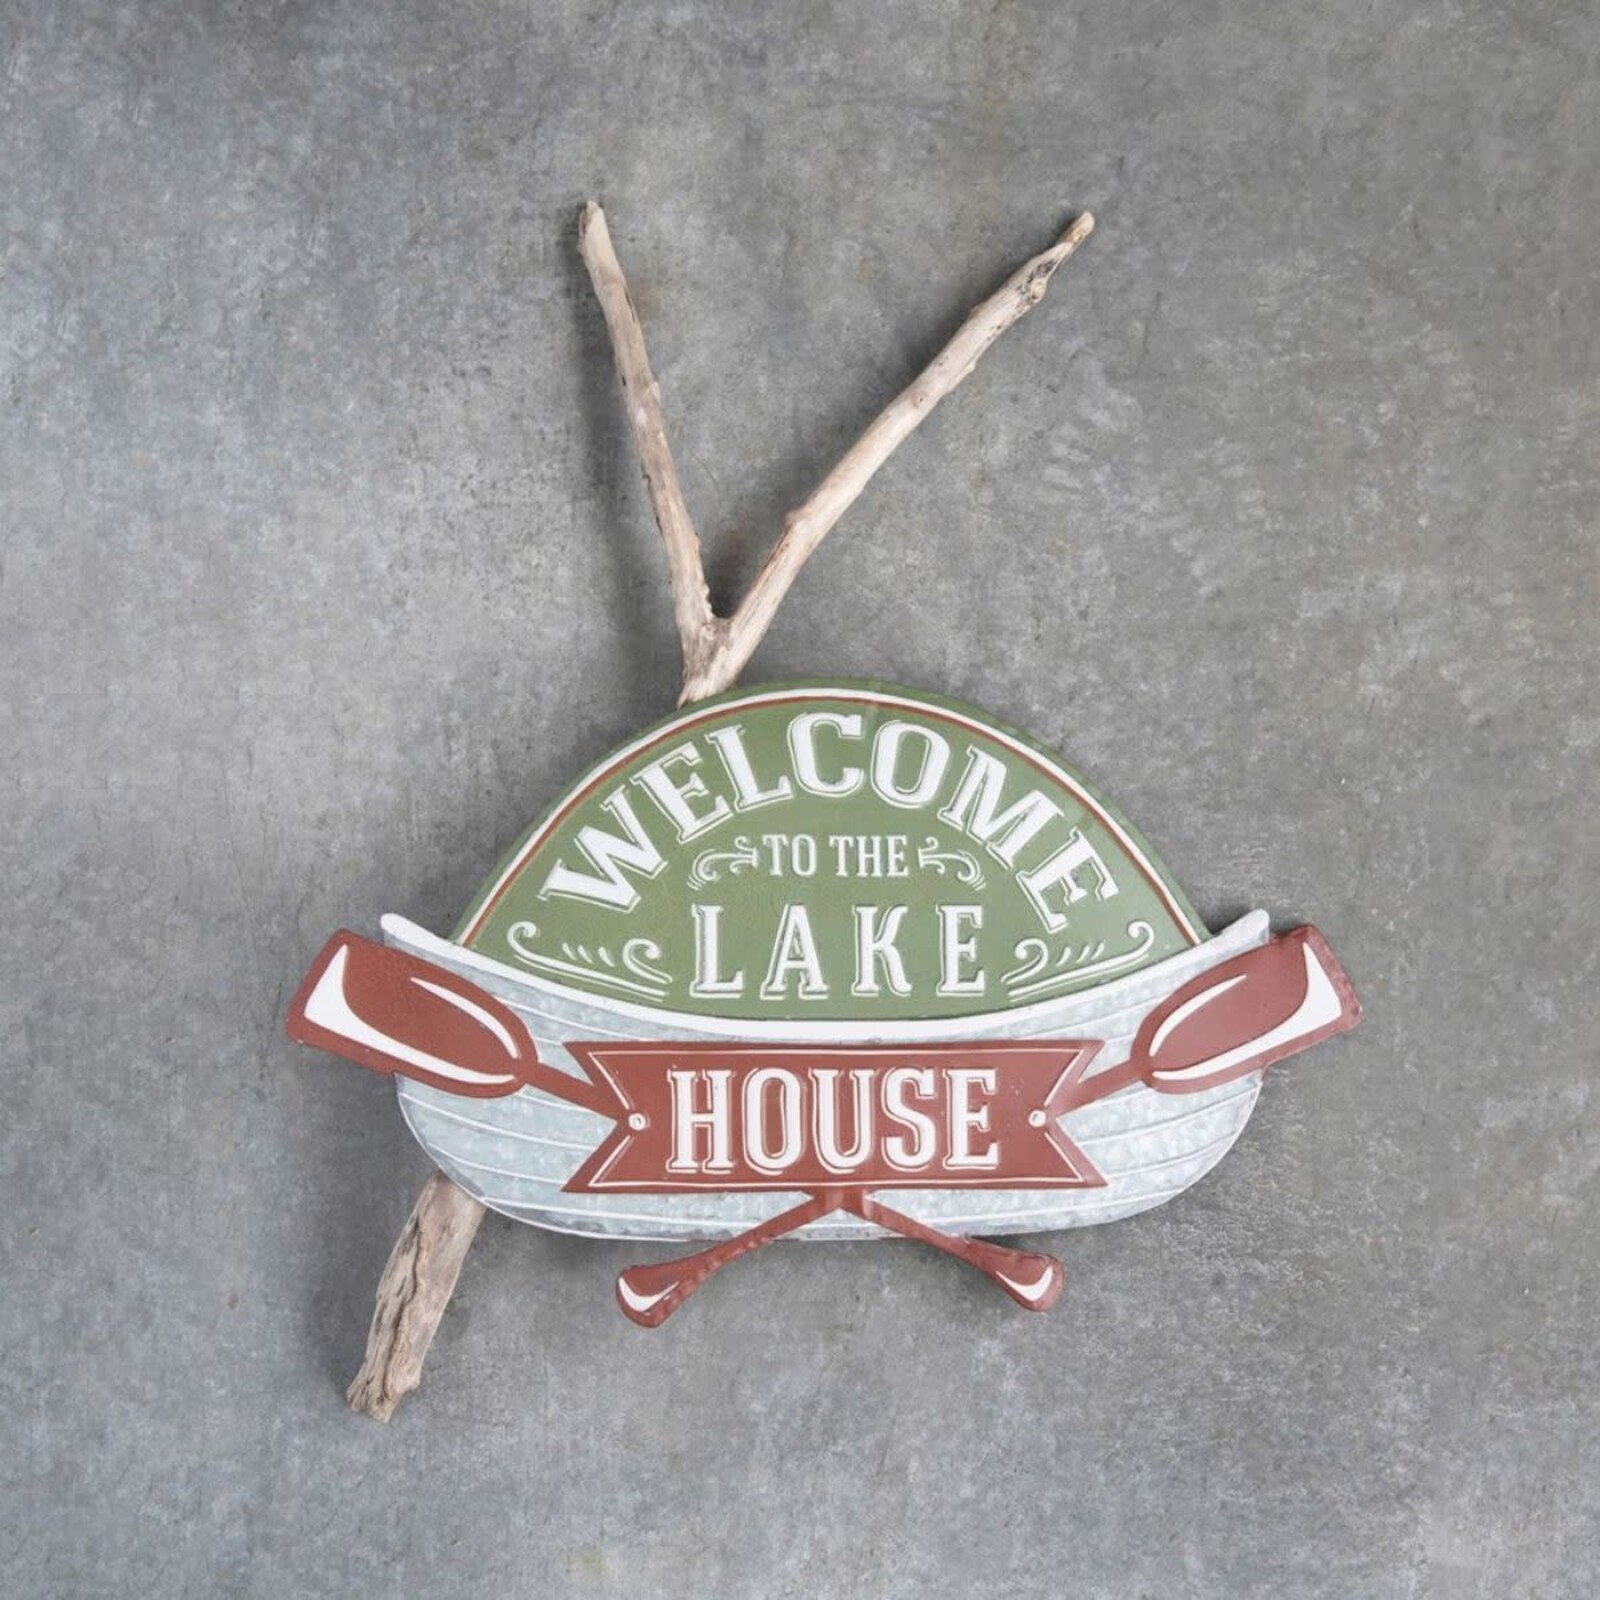 Creative Co-Op 24"W x 15"H Embossed Metal Wall Decor "Welcome to the Lake House", DF4059 loading=